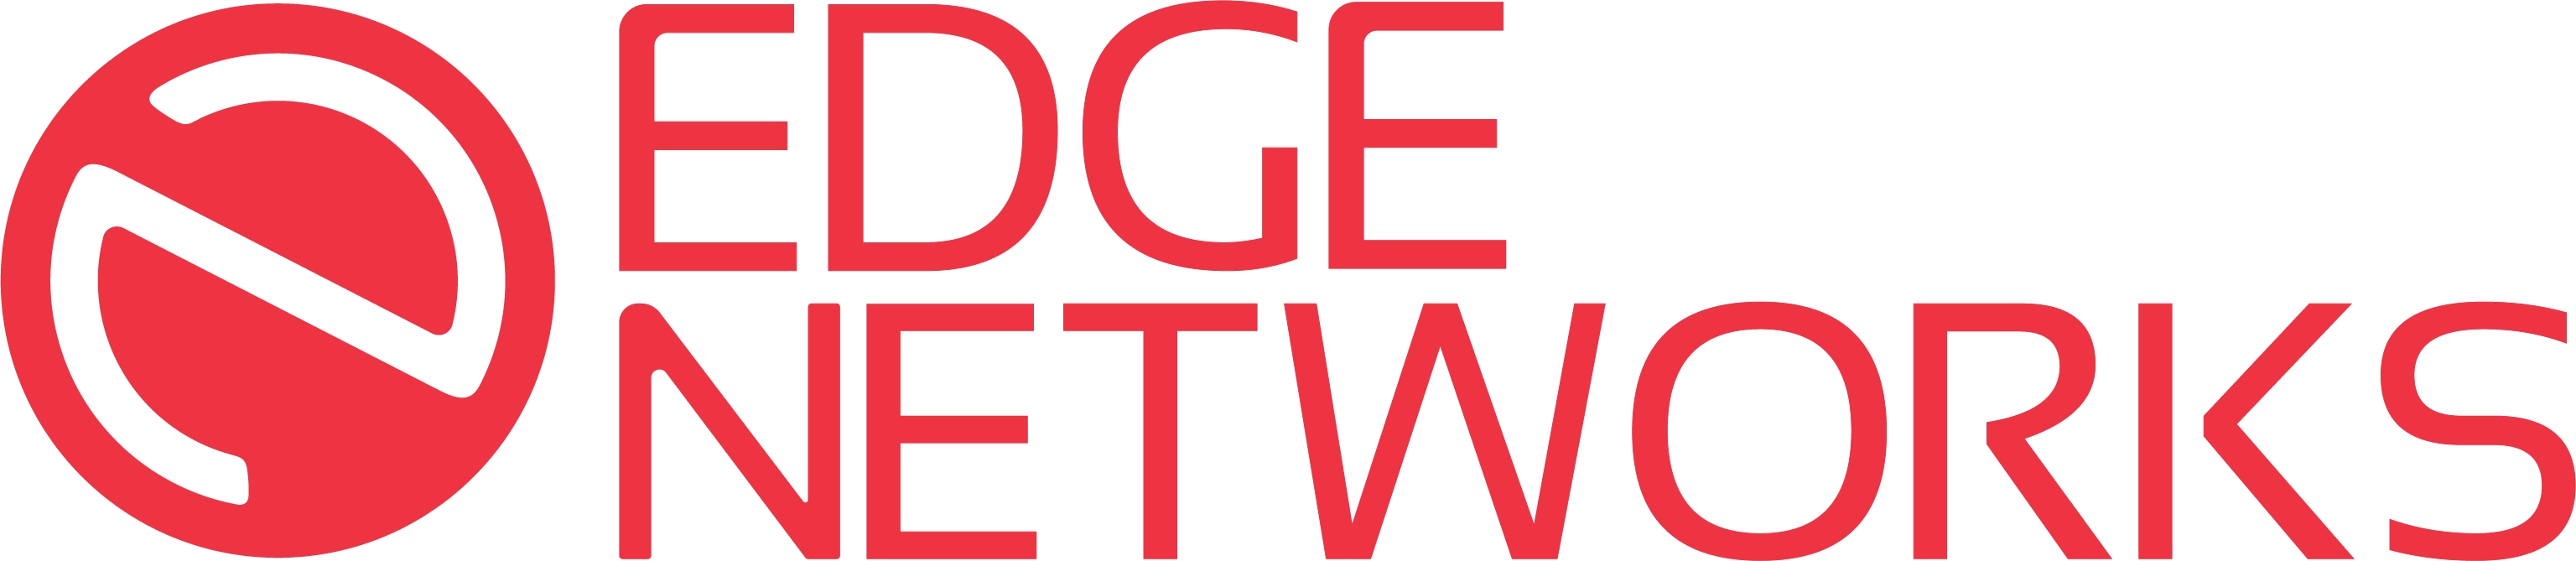 Official Edge Networks Logo